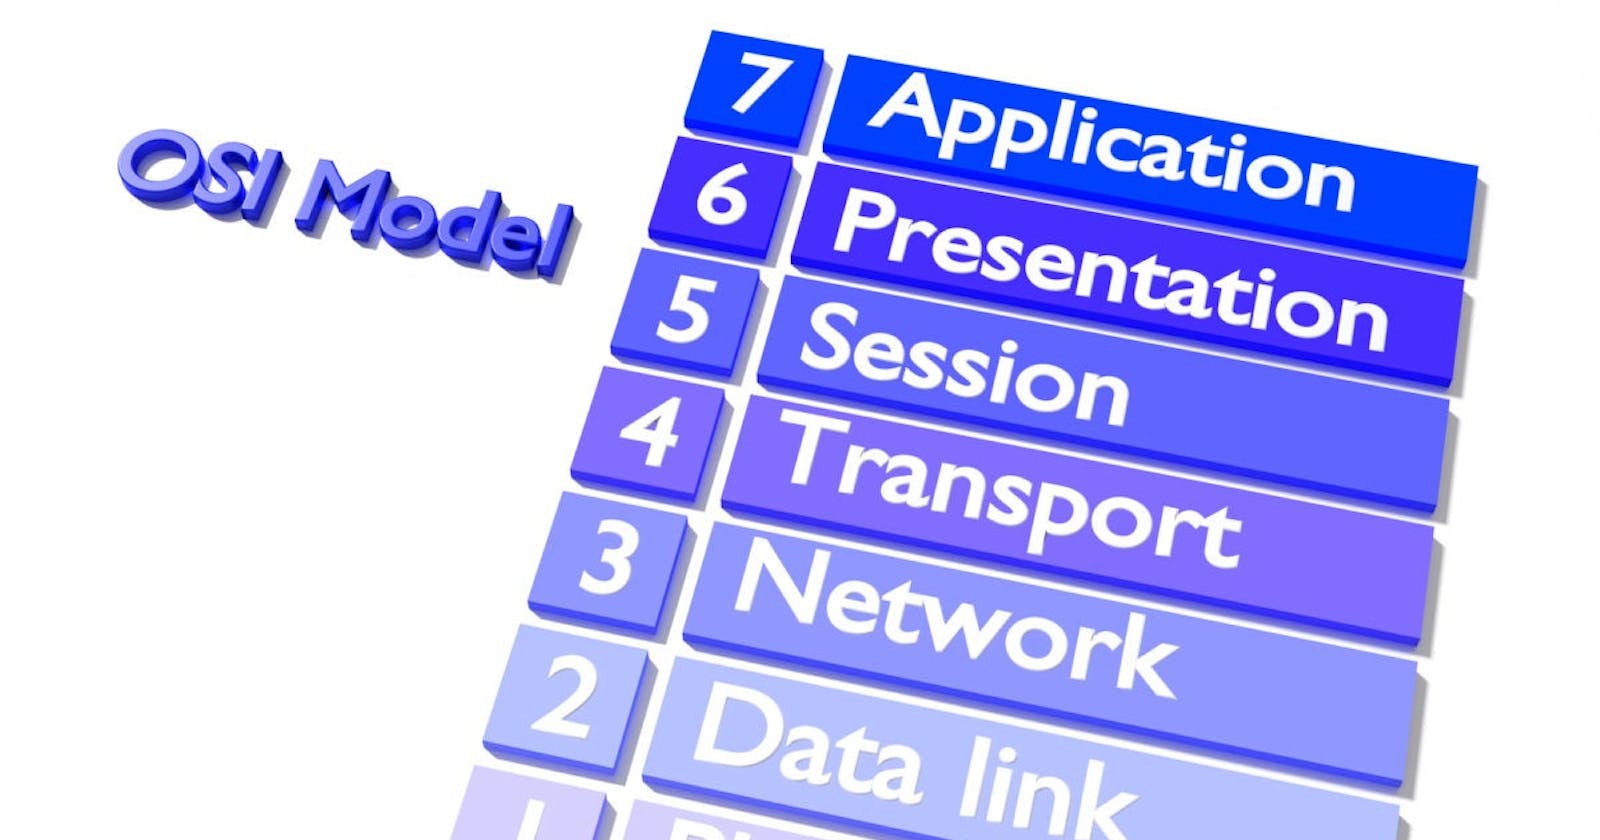 What Is An OSI MODEL?